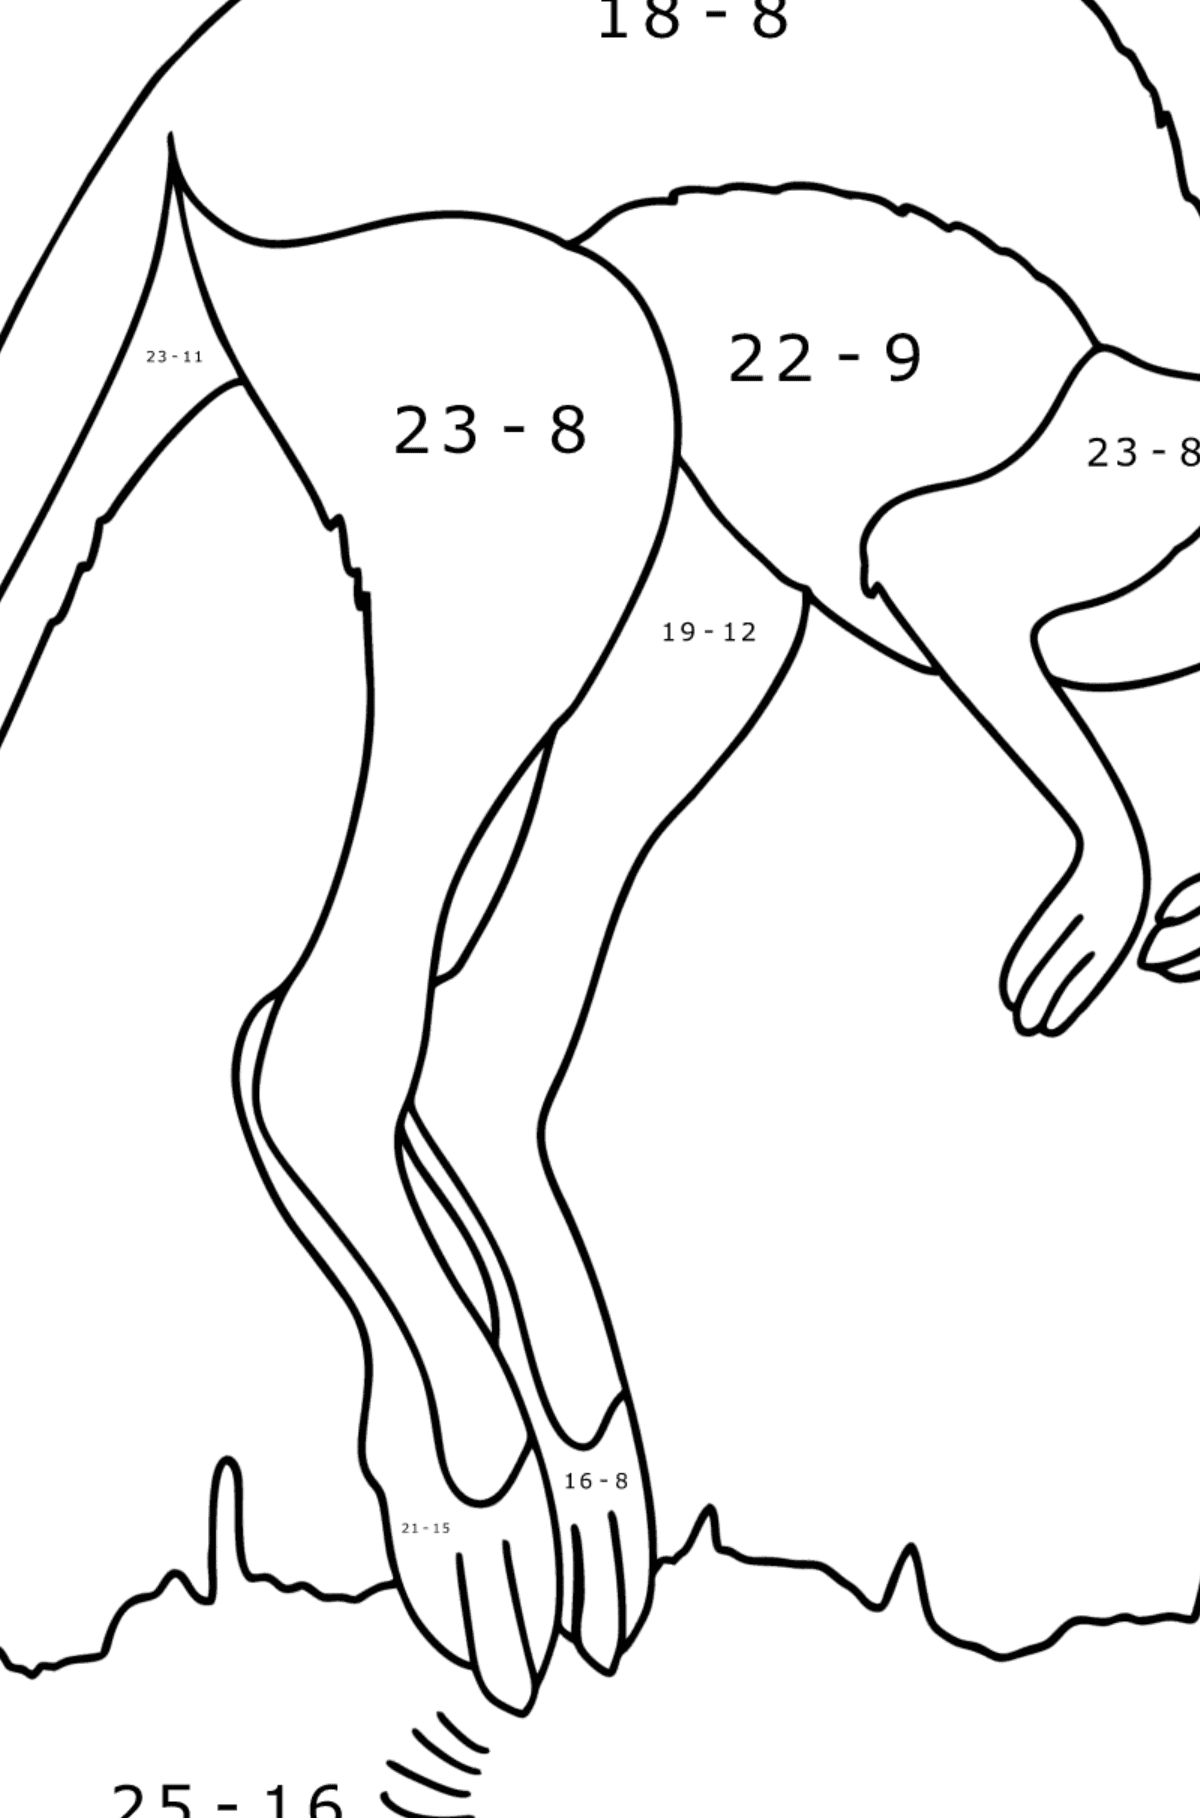 Jumping Kangaroo coloring page - Math Coloring - Subtraction for Kids